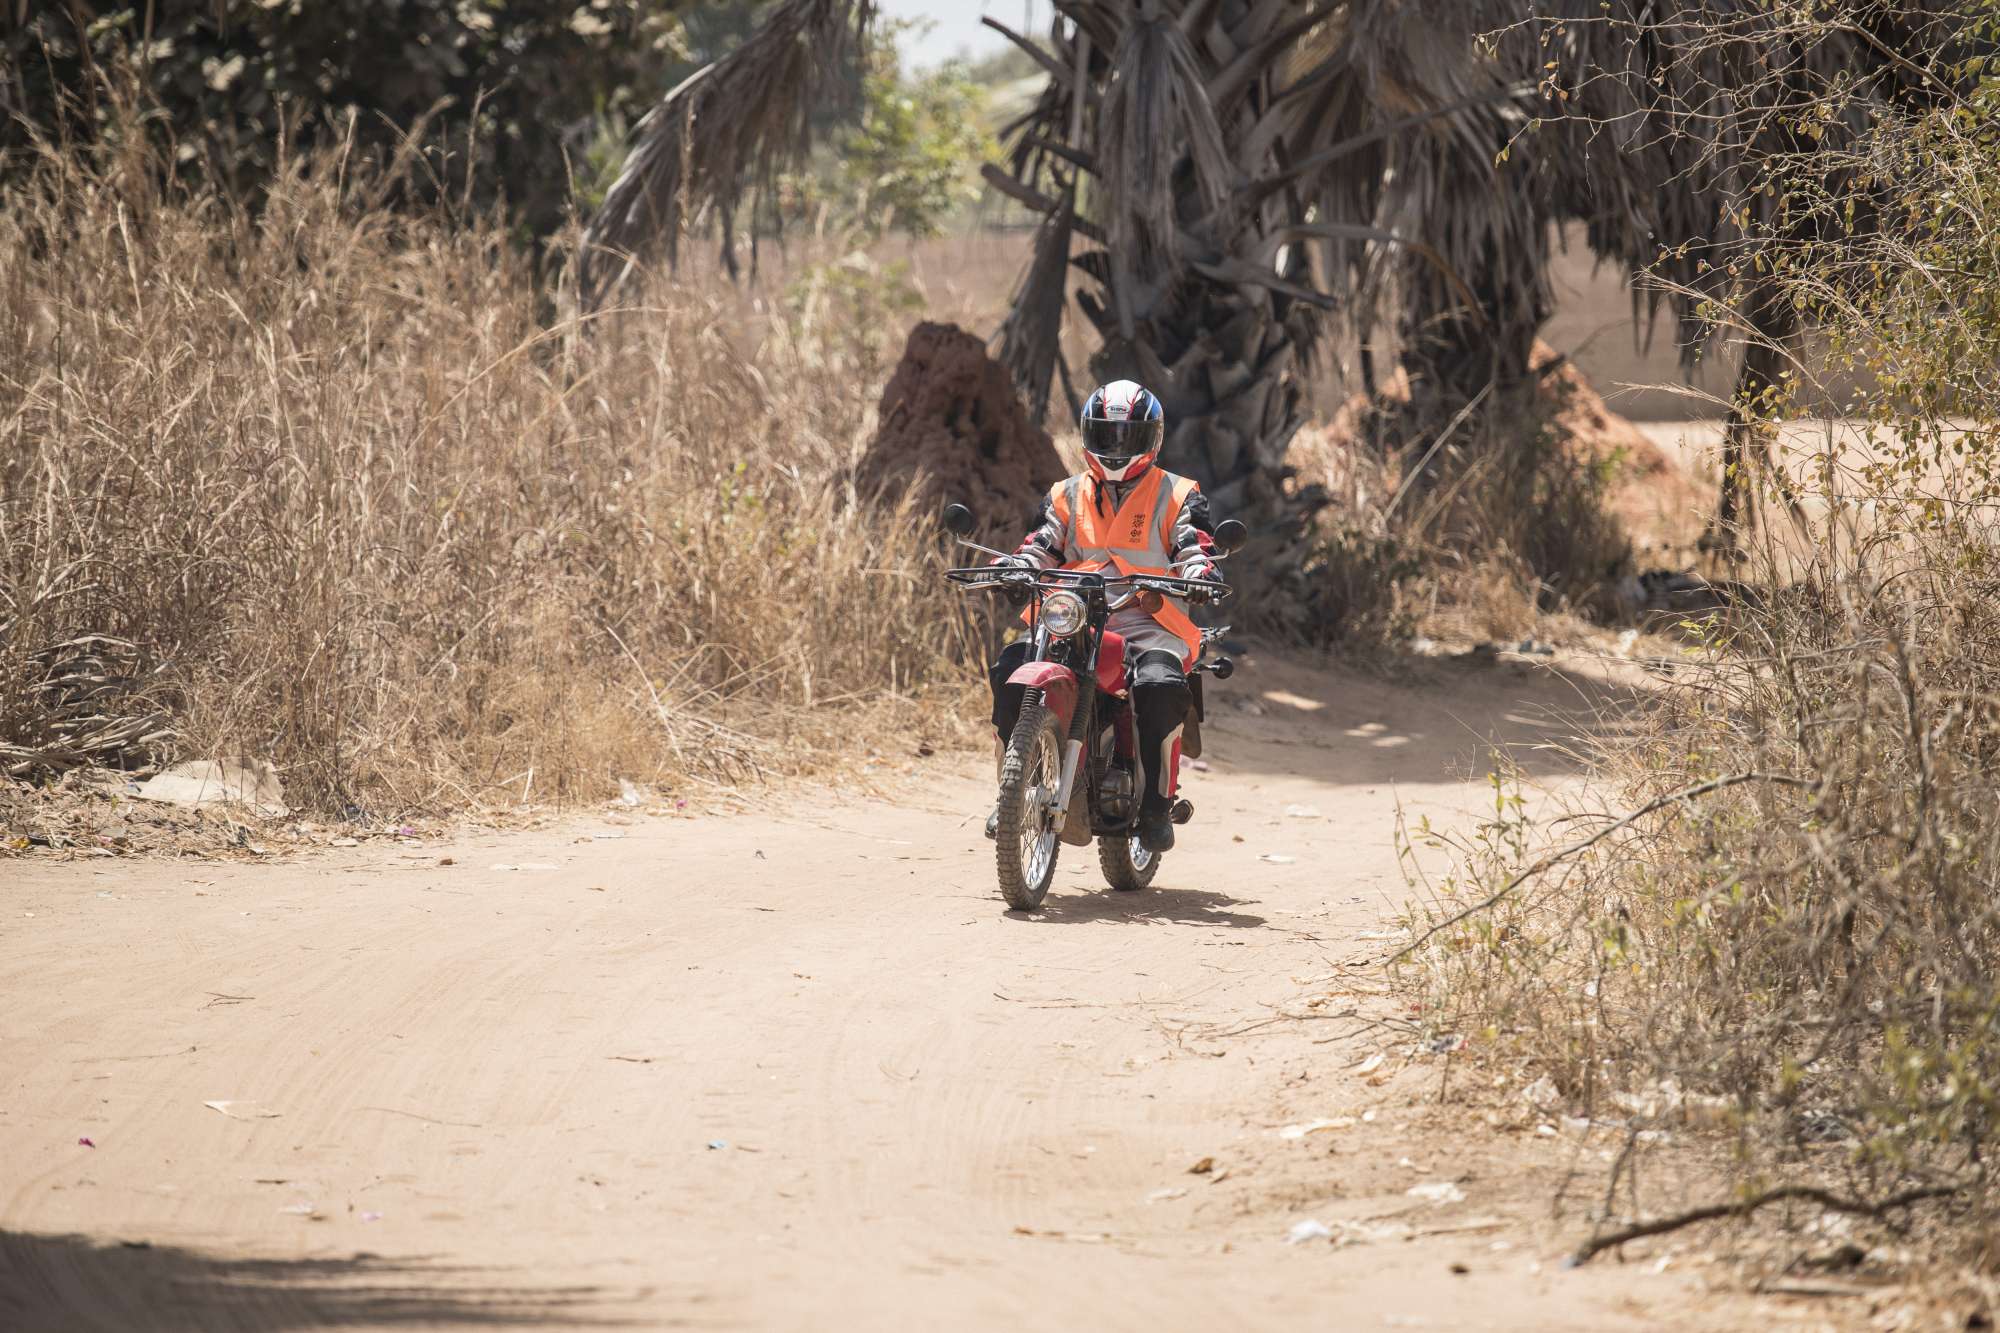 Two Wheels for Life powering Riders For Health in Gambia 2018